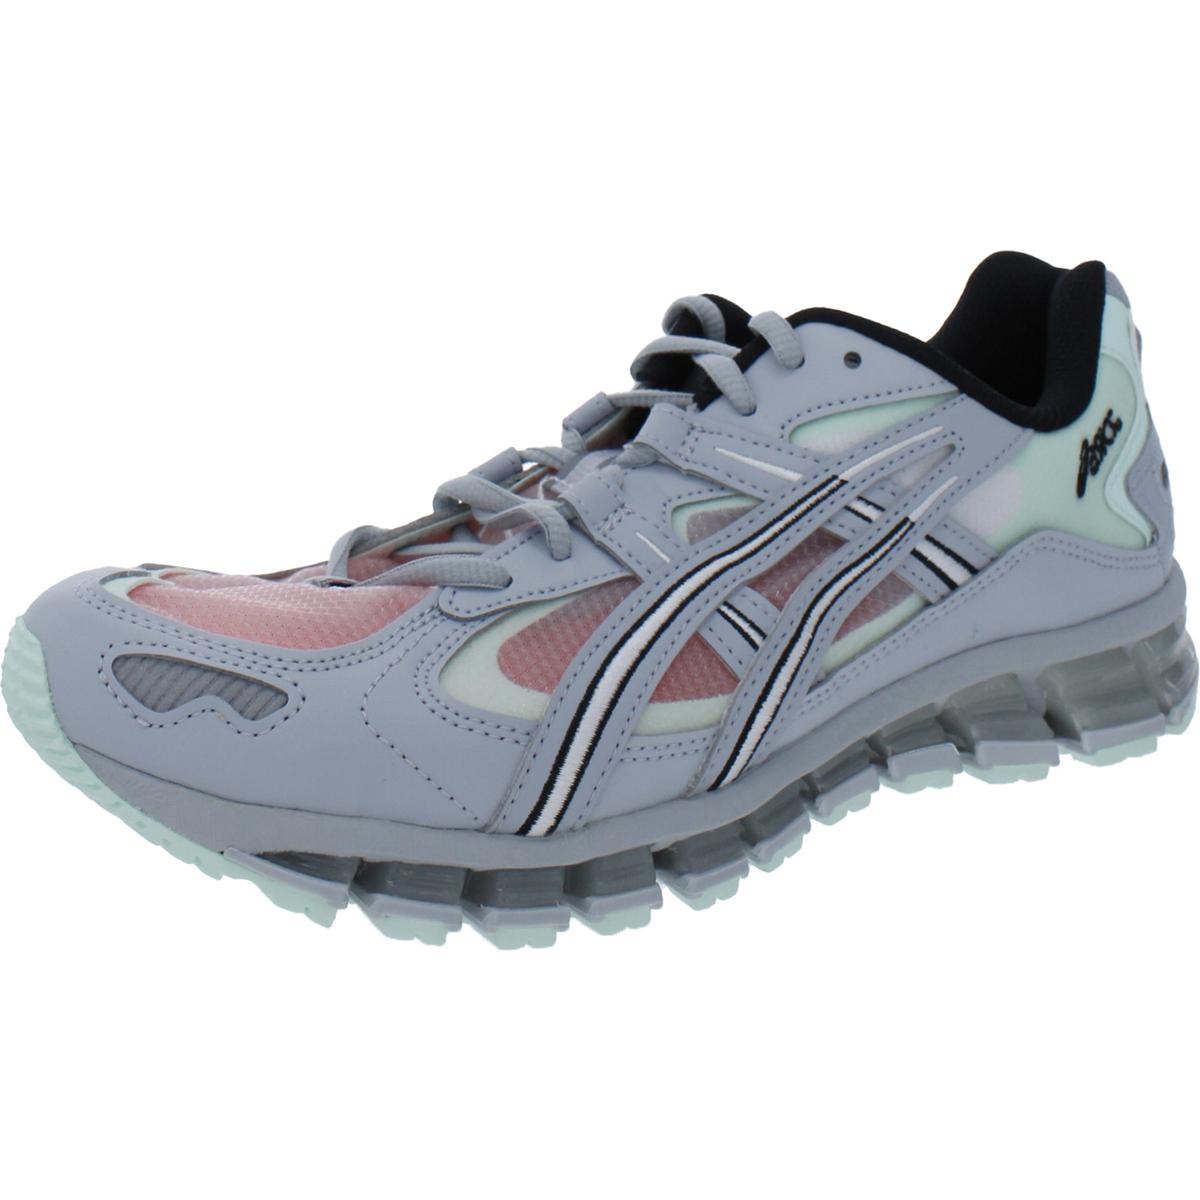 ASICS Gel-Kayano 5 360 Mens Trainers Exercise Athletic and Training Shoes